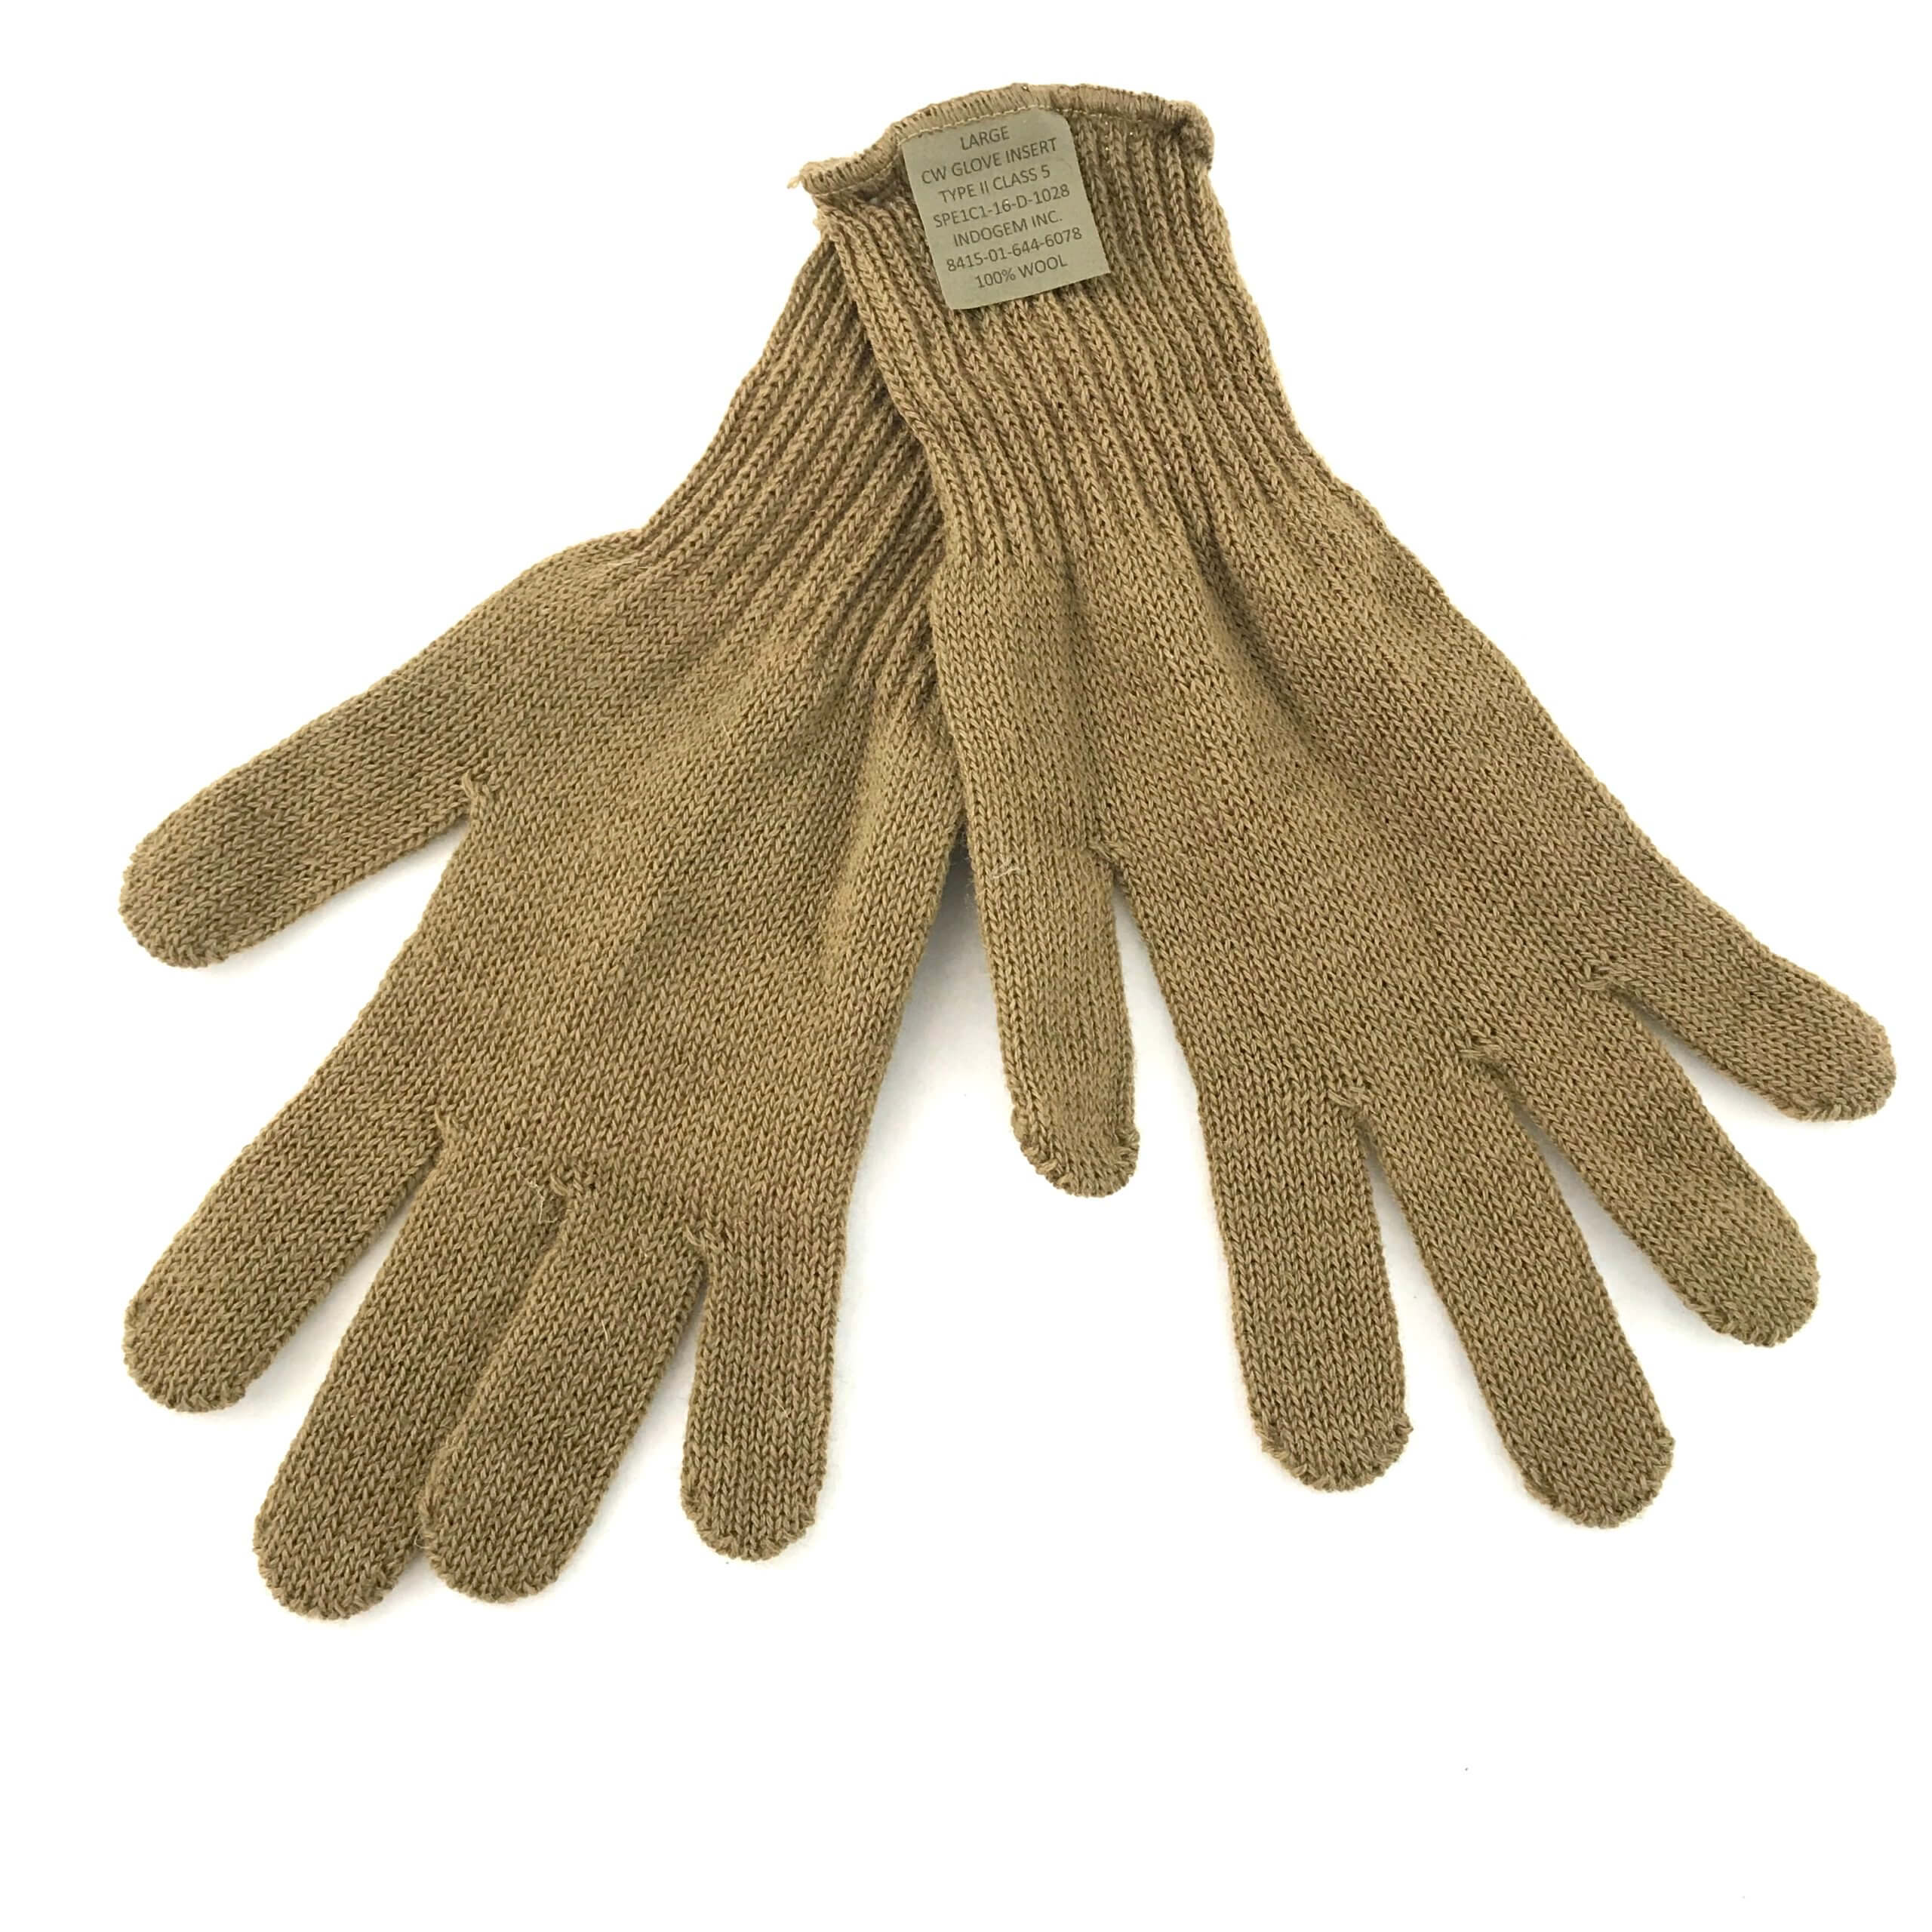 LARGE U.S MILITARY ISSUE COLD WEATHER GLOVE INSERTS LINERS SIZE X 